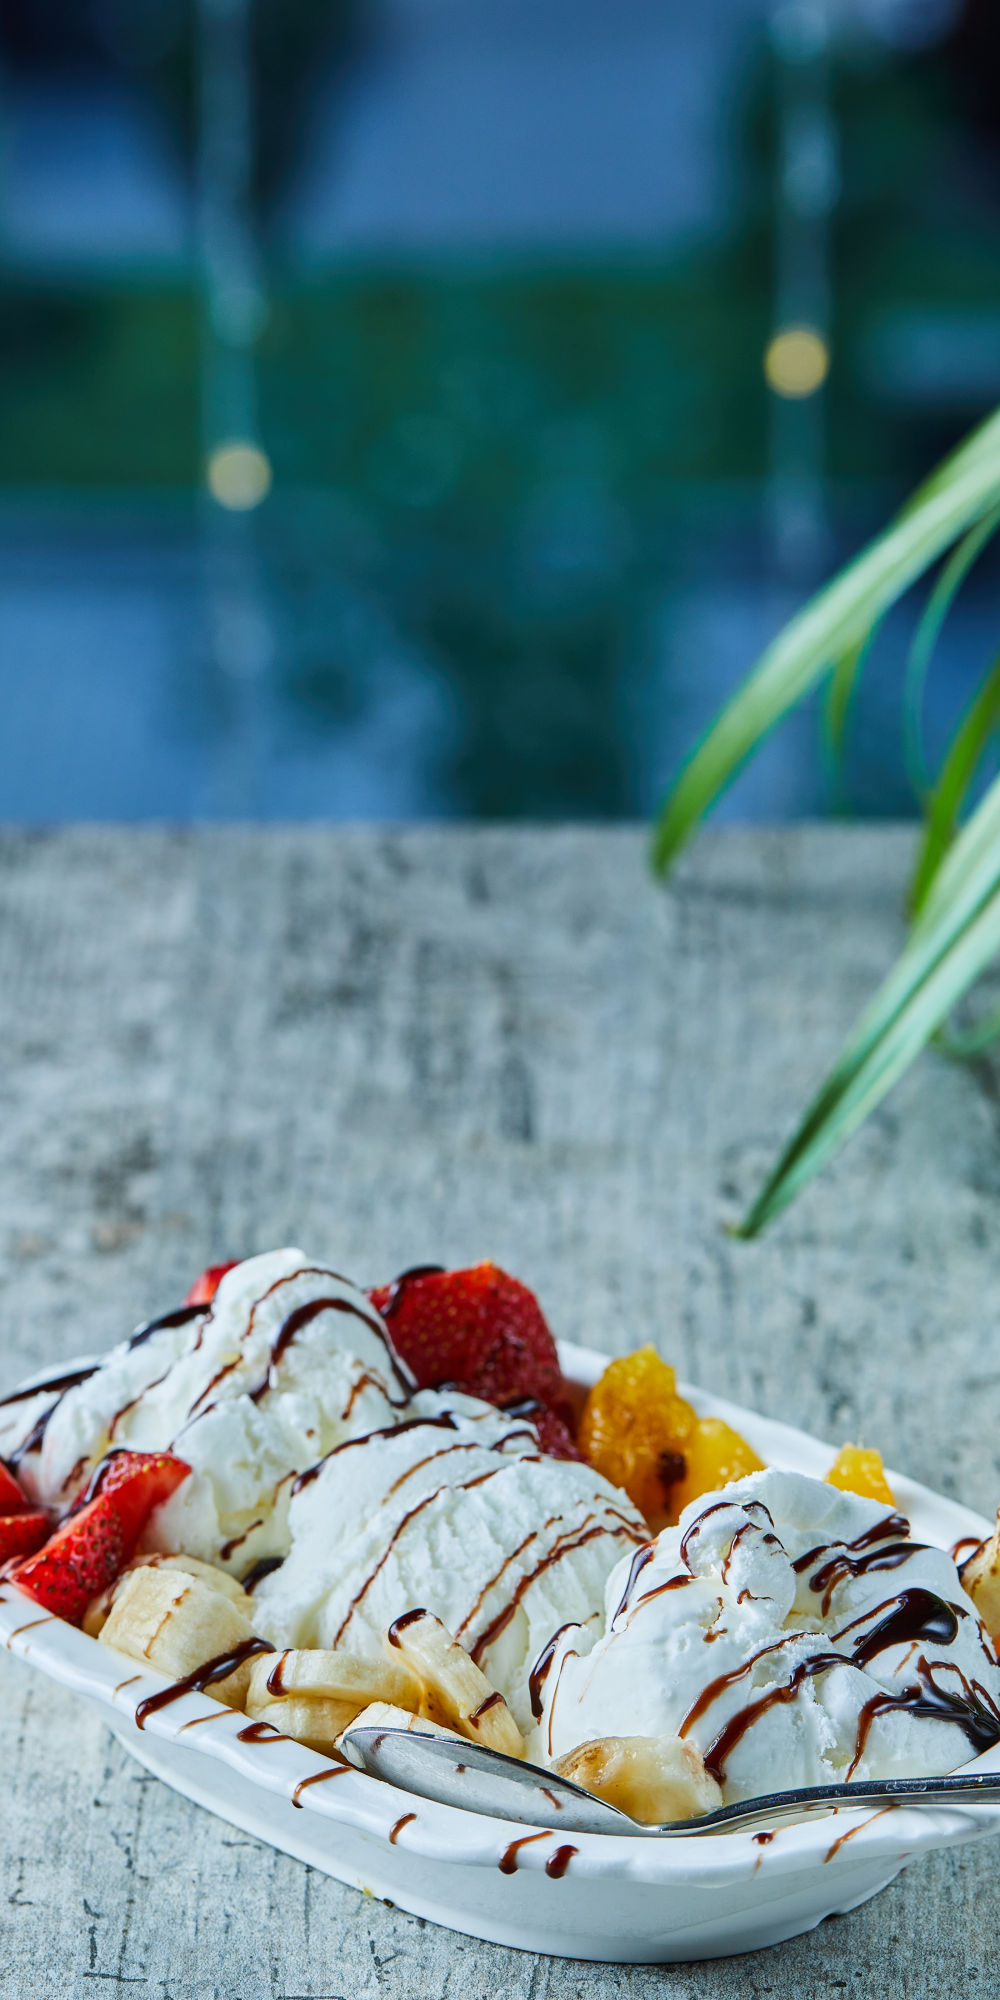 ice-cream-with-strawberry-banana-orange-white-plate-with-spoon